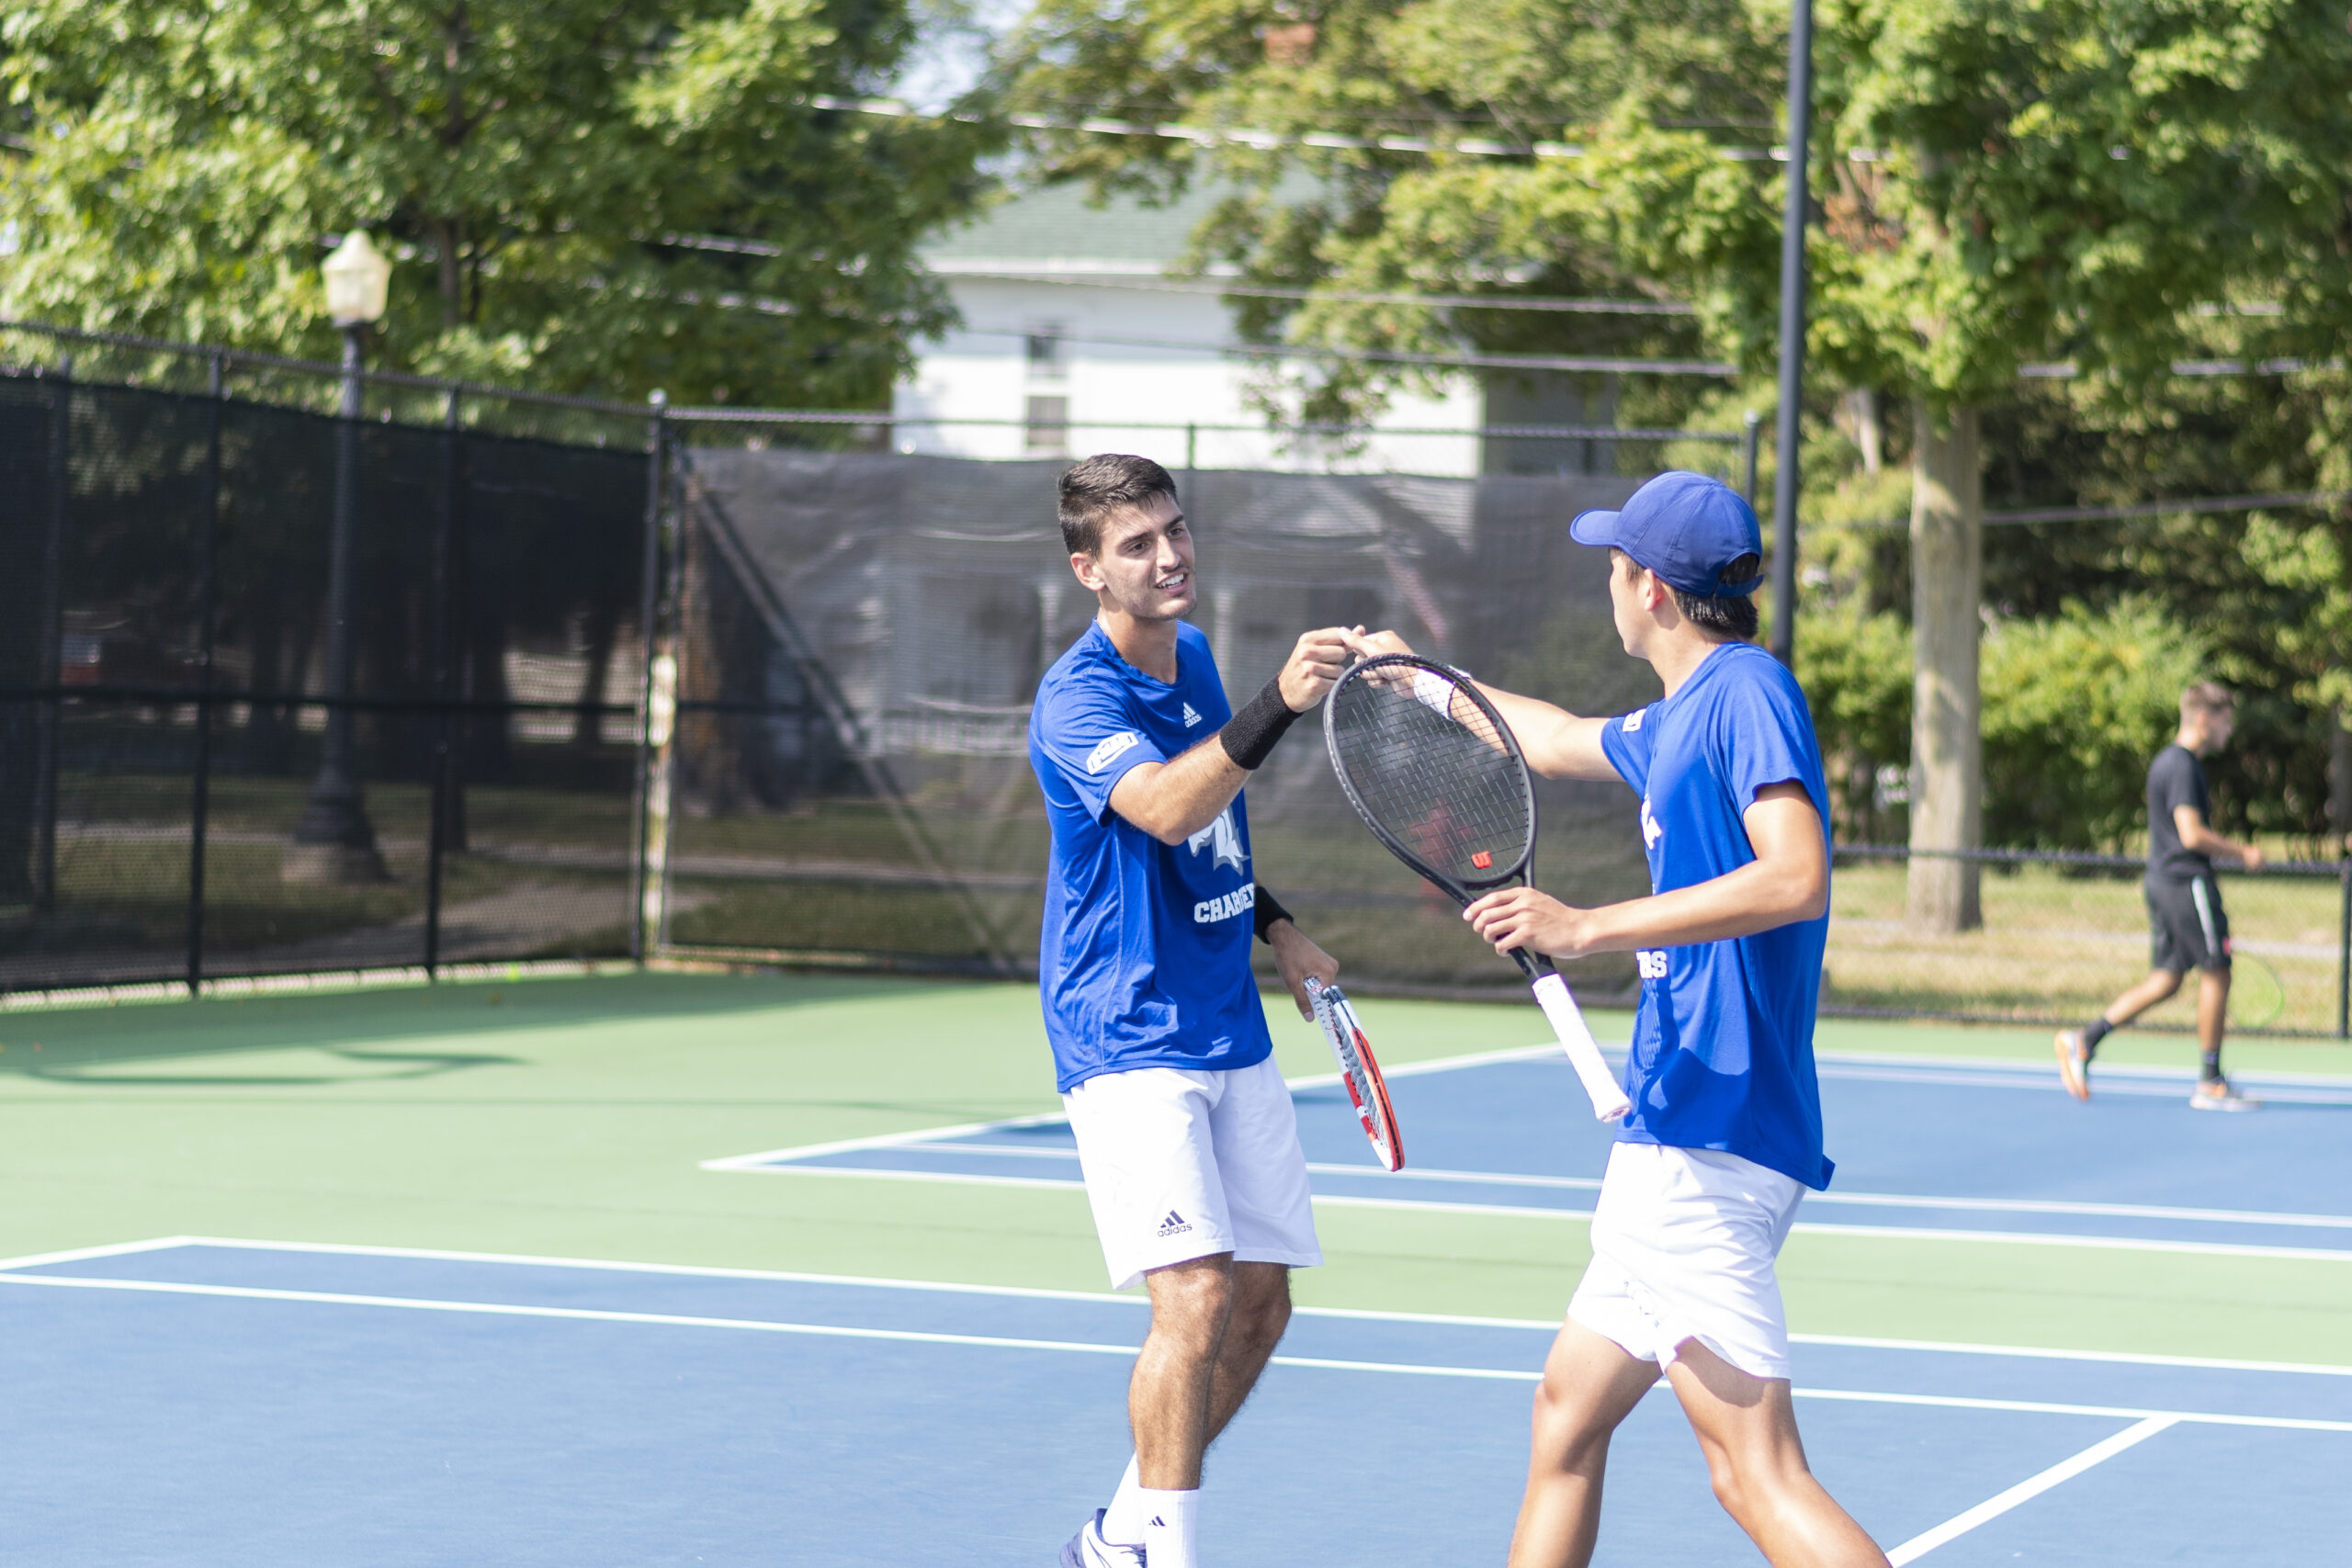 Cimpeanu, Barstow set to compete in first ITA Cup in program history